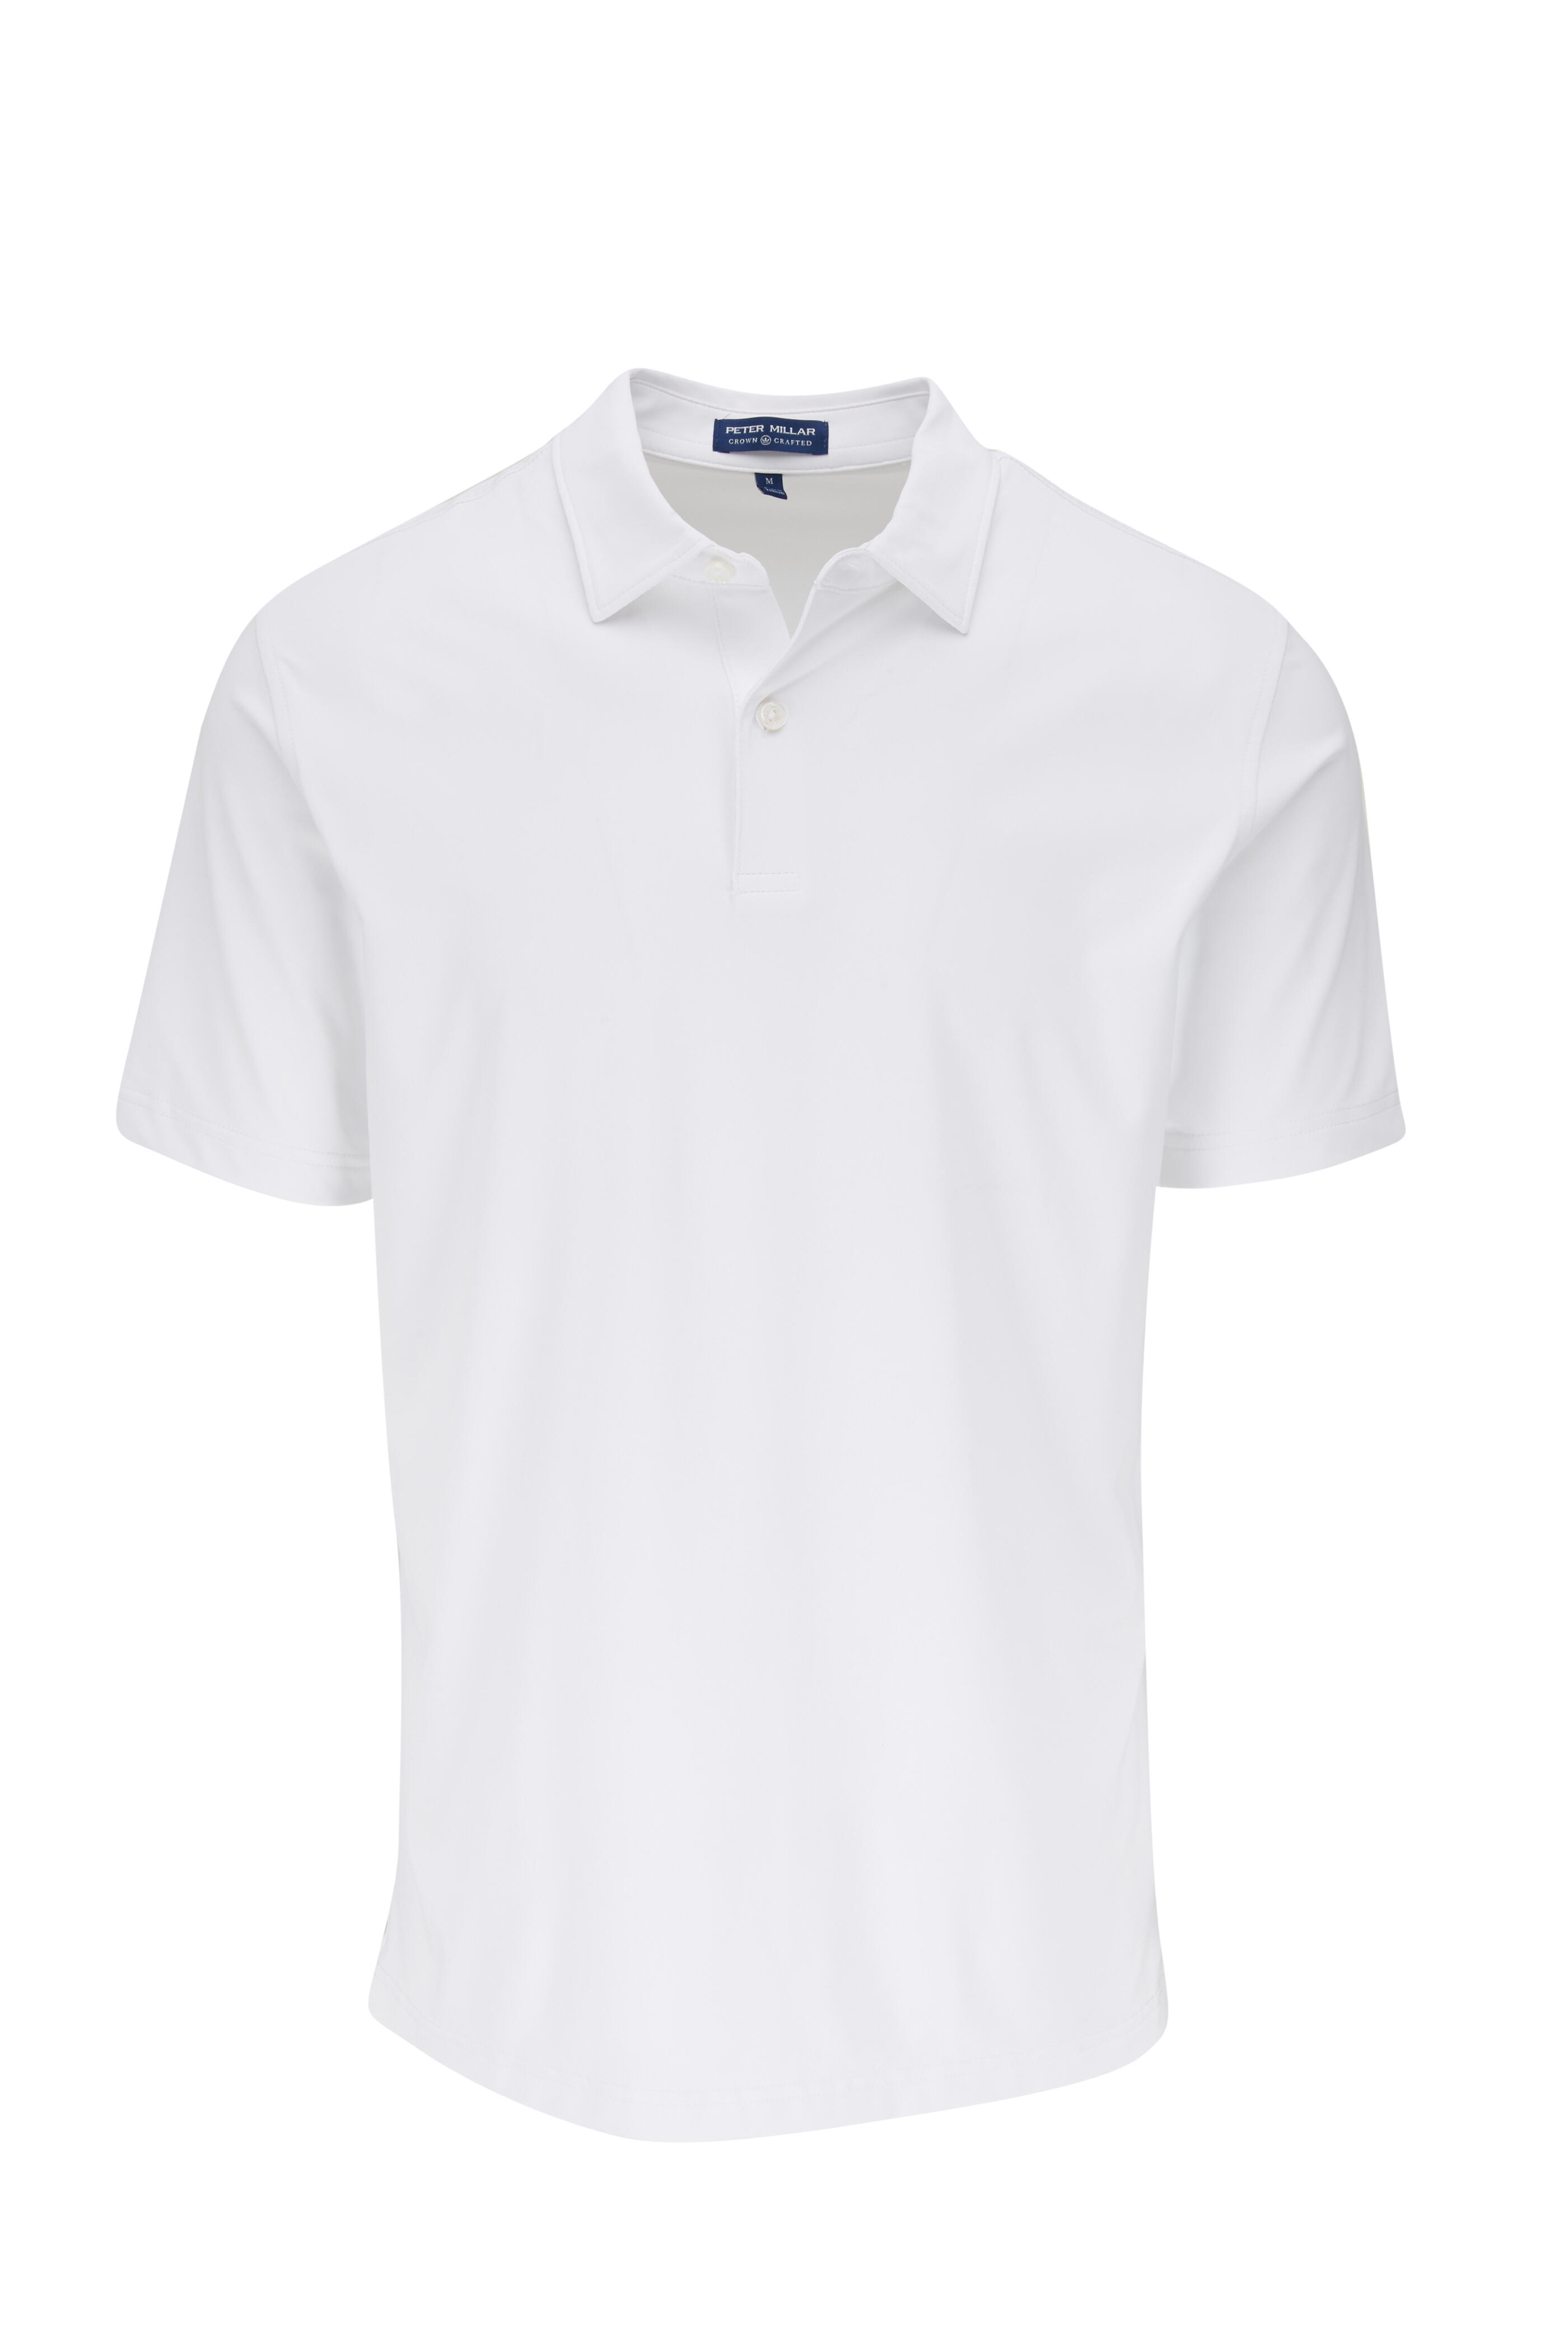 Peter Millar - Crown Crafted White Performance Polo